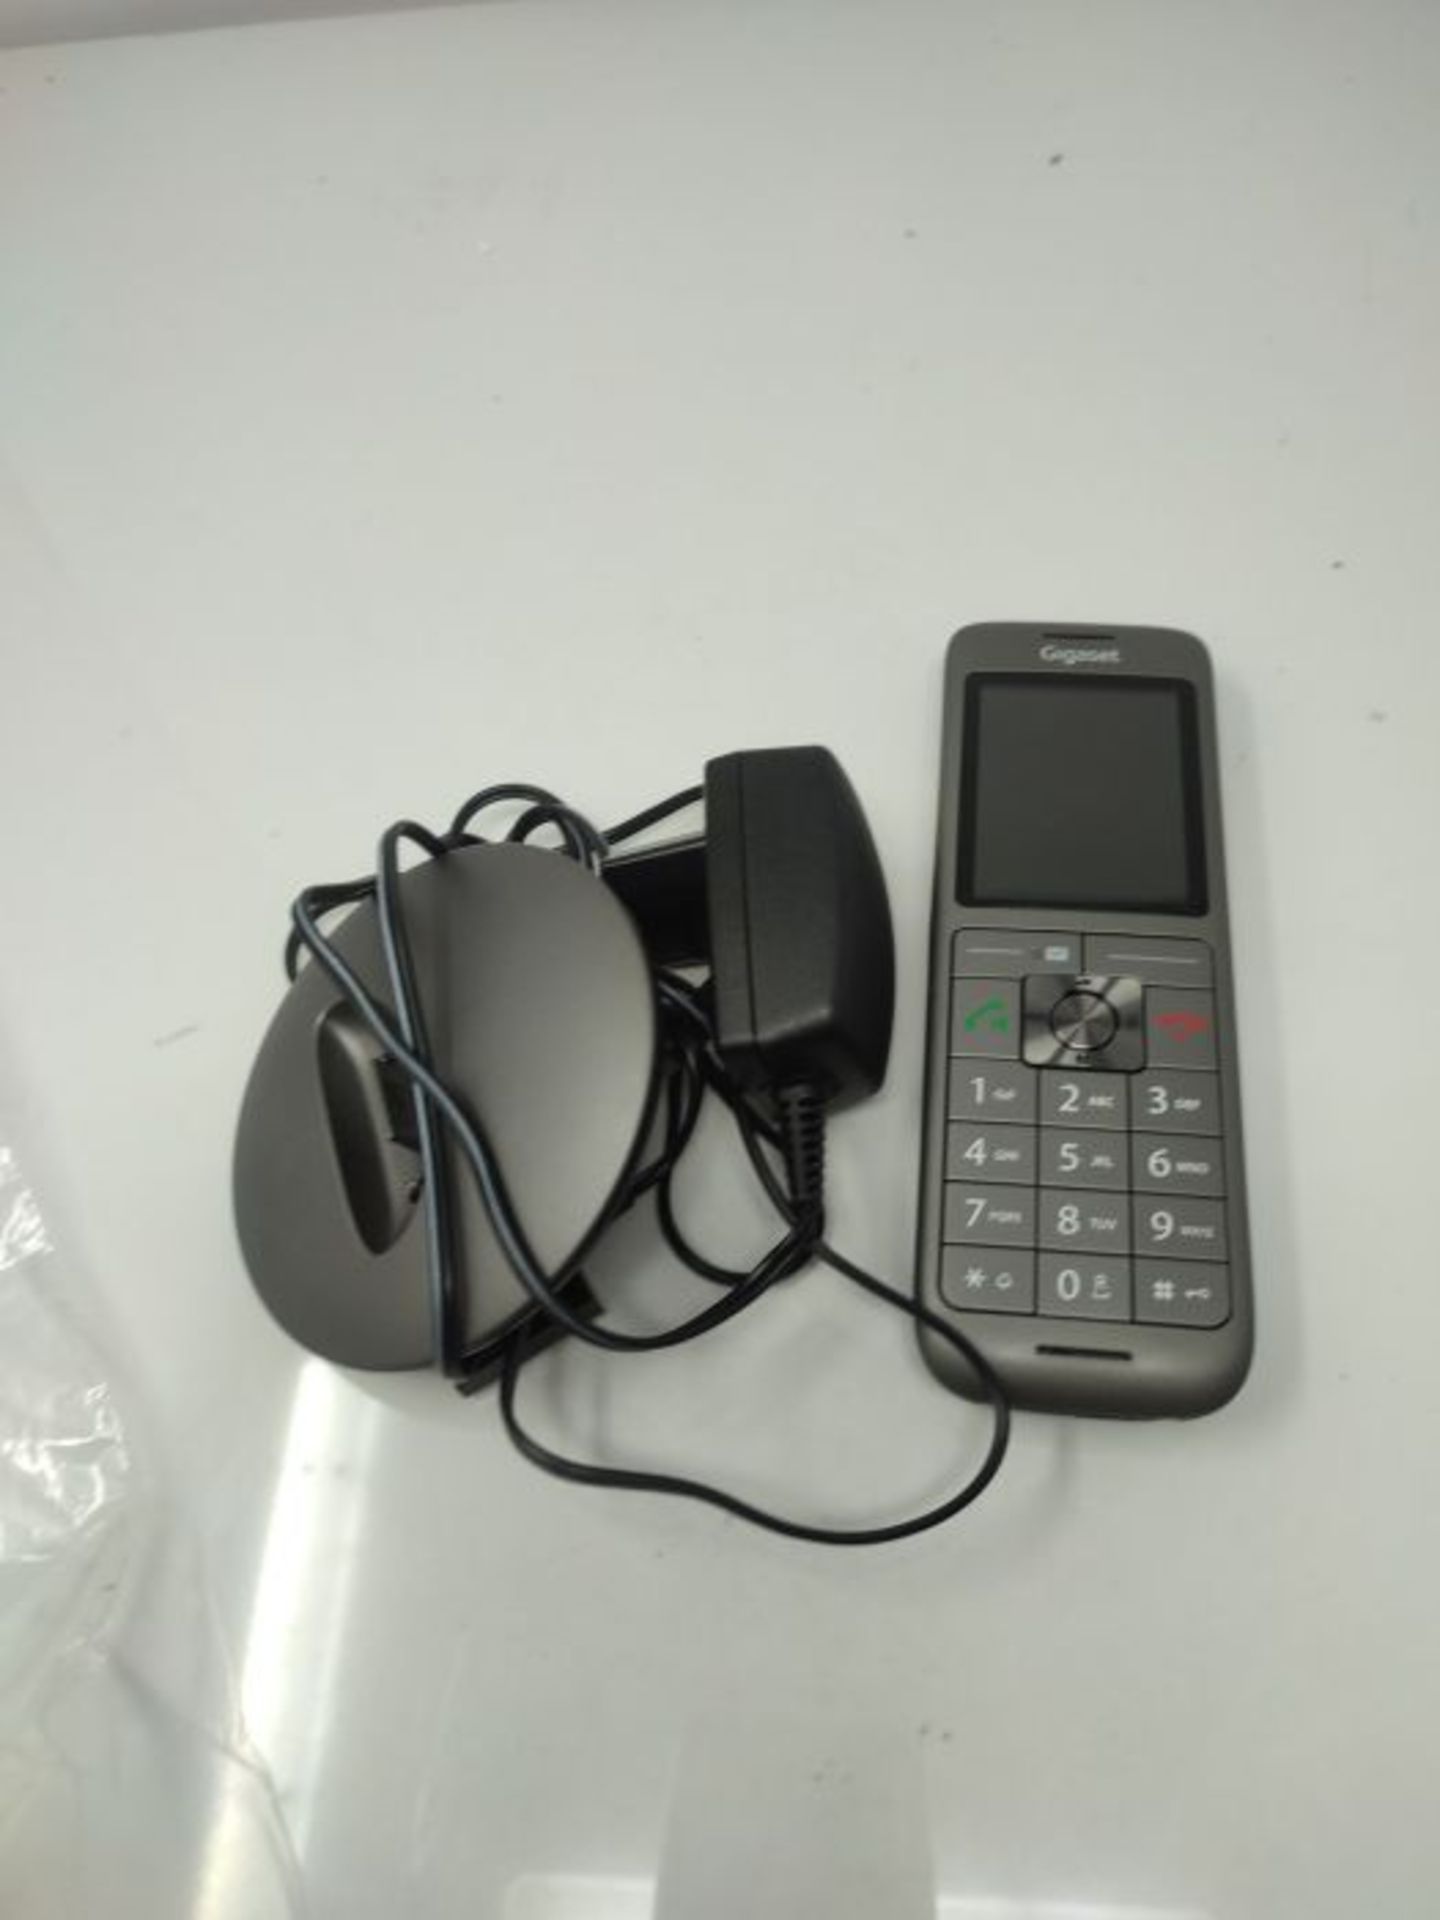 RRP £60.00 Gigaset CL660HX - cordless DECT telephone for routers - Fritzbox, Speedport compatible - Image 2 of 2